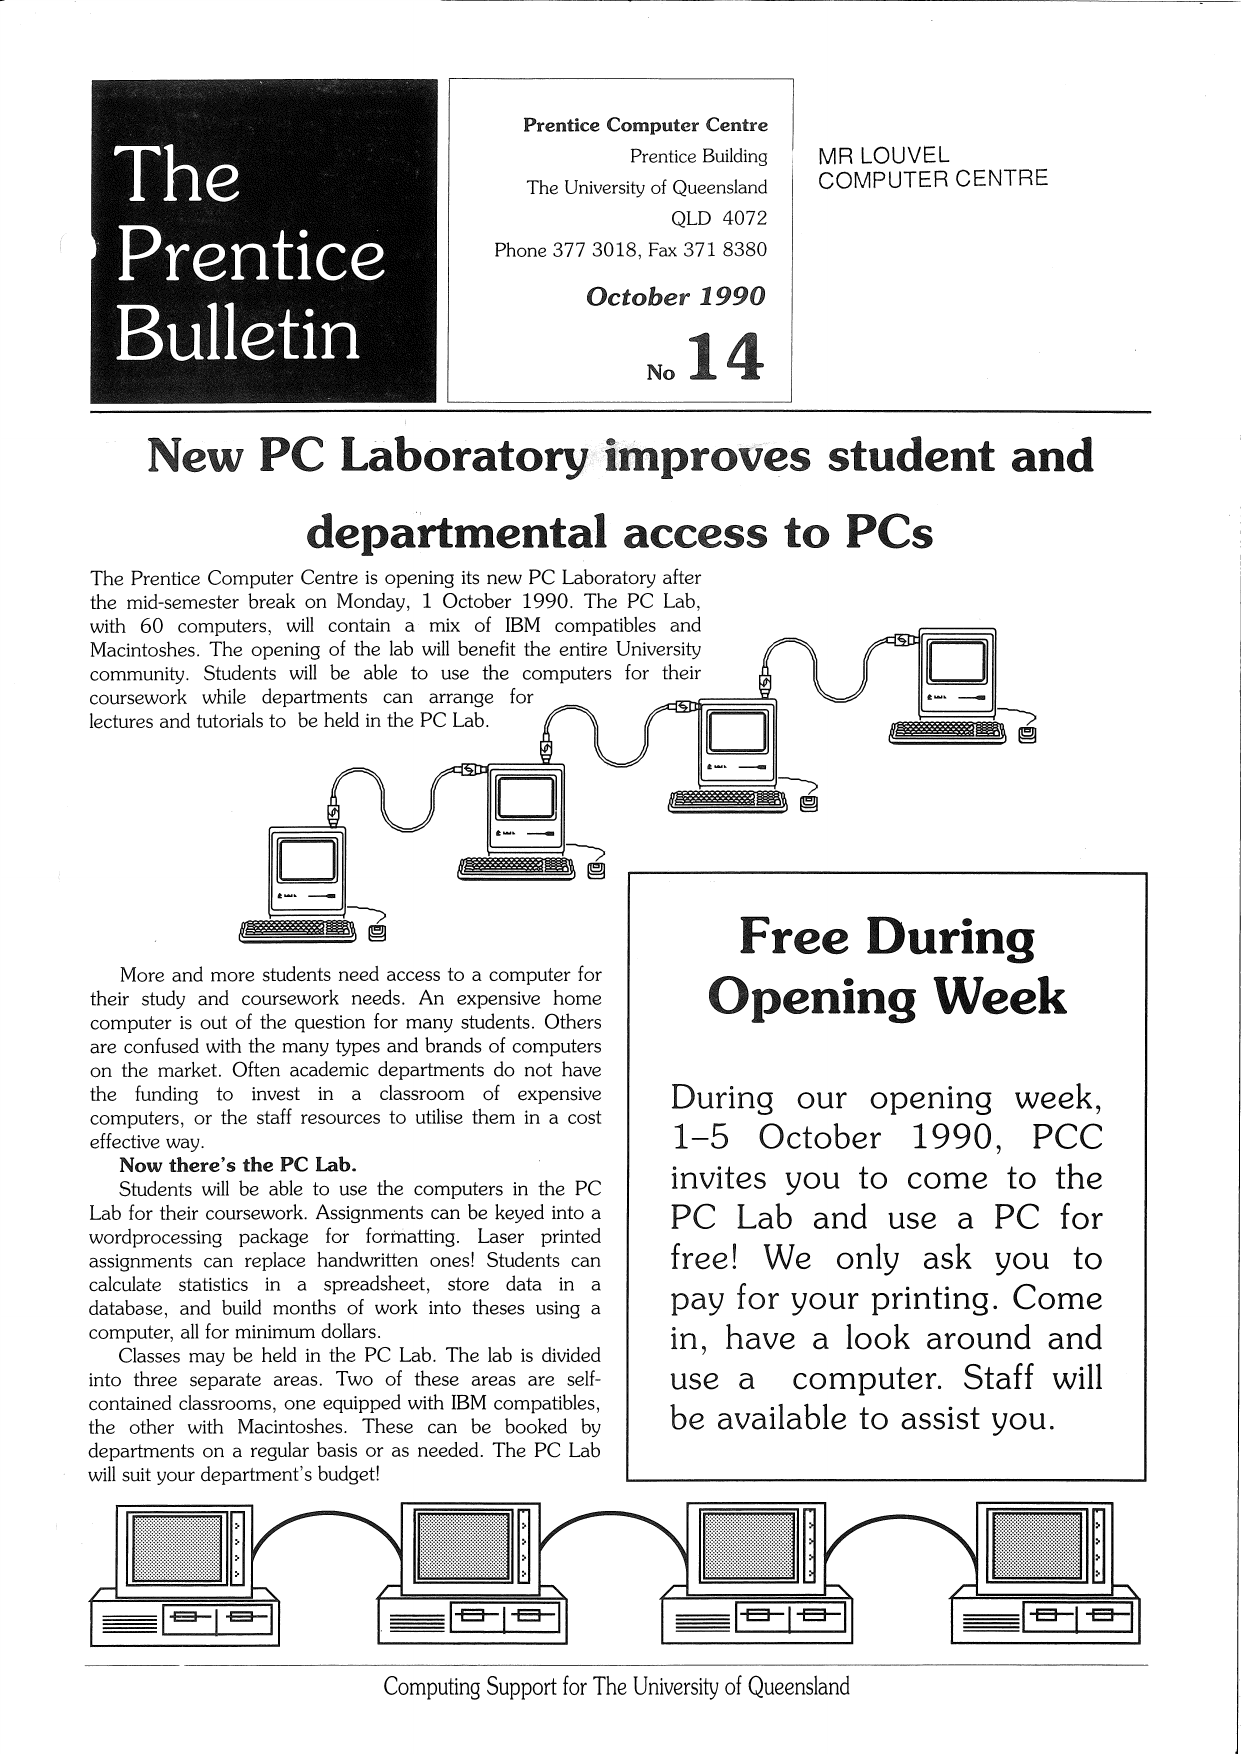 Page 1 of 2 - The Prentice Bulletin Number 14, October 1990